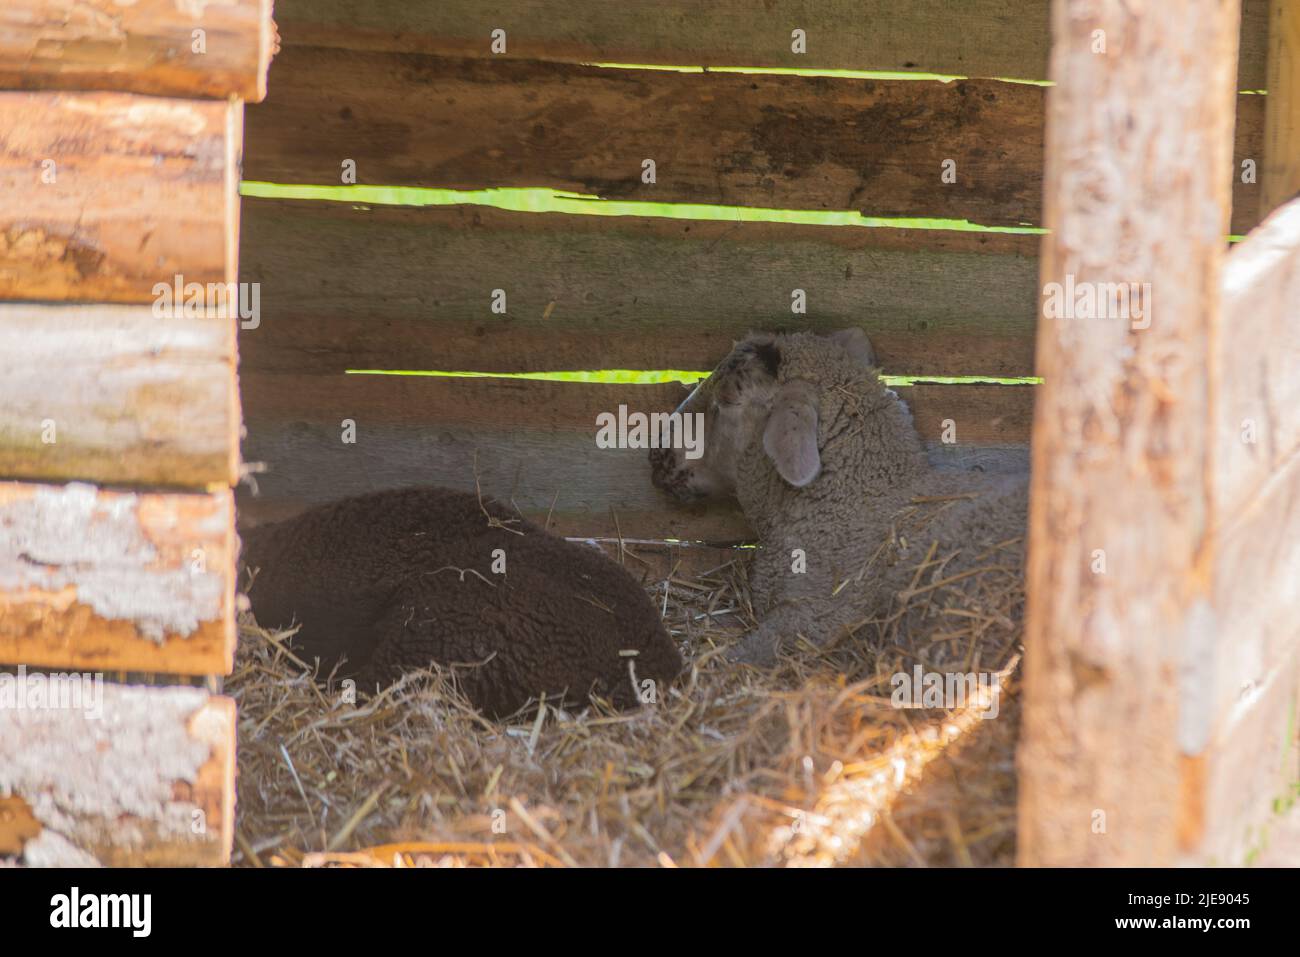 white and brown sheep sleeping in a wooden house fleeing the brutal heat of the summer sun. Heat wave. Animals. Stock Photo